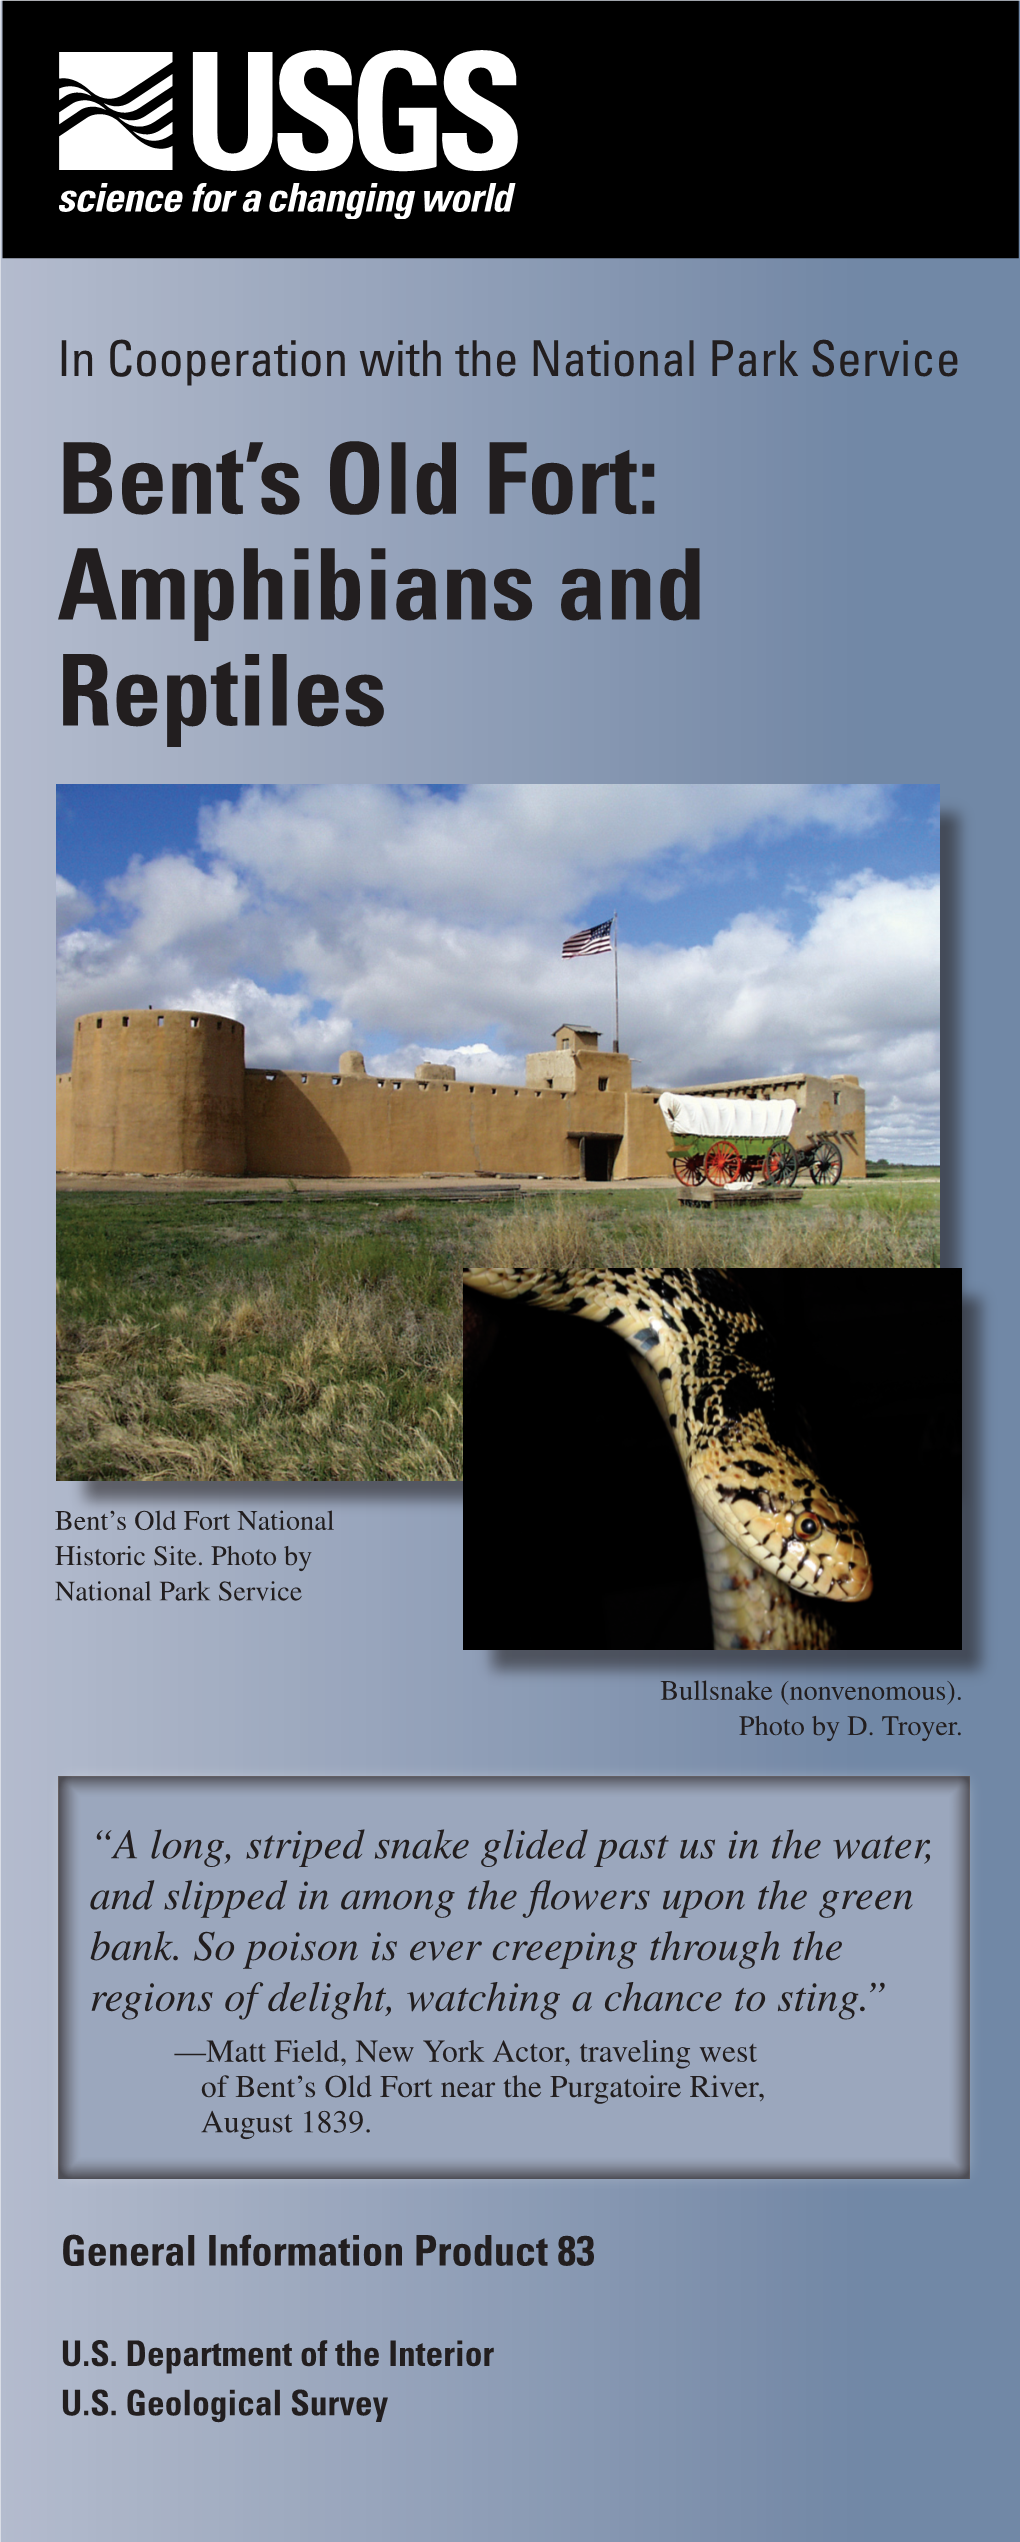 Bent's Old Fort: Amphibians and Reptiles